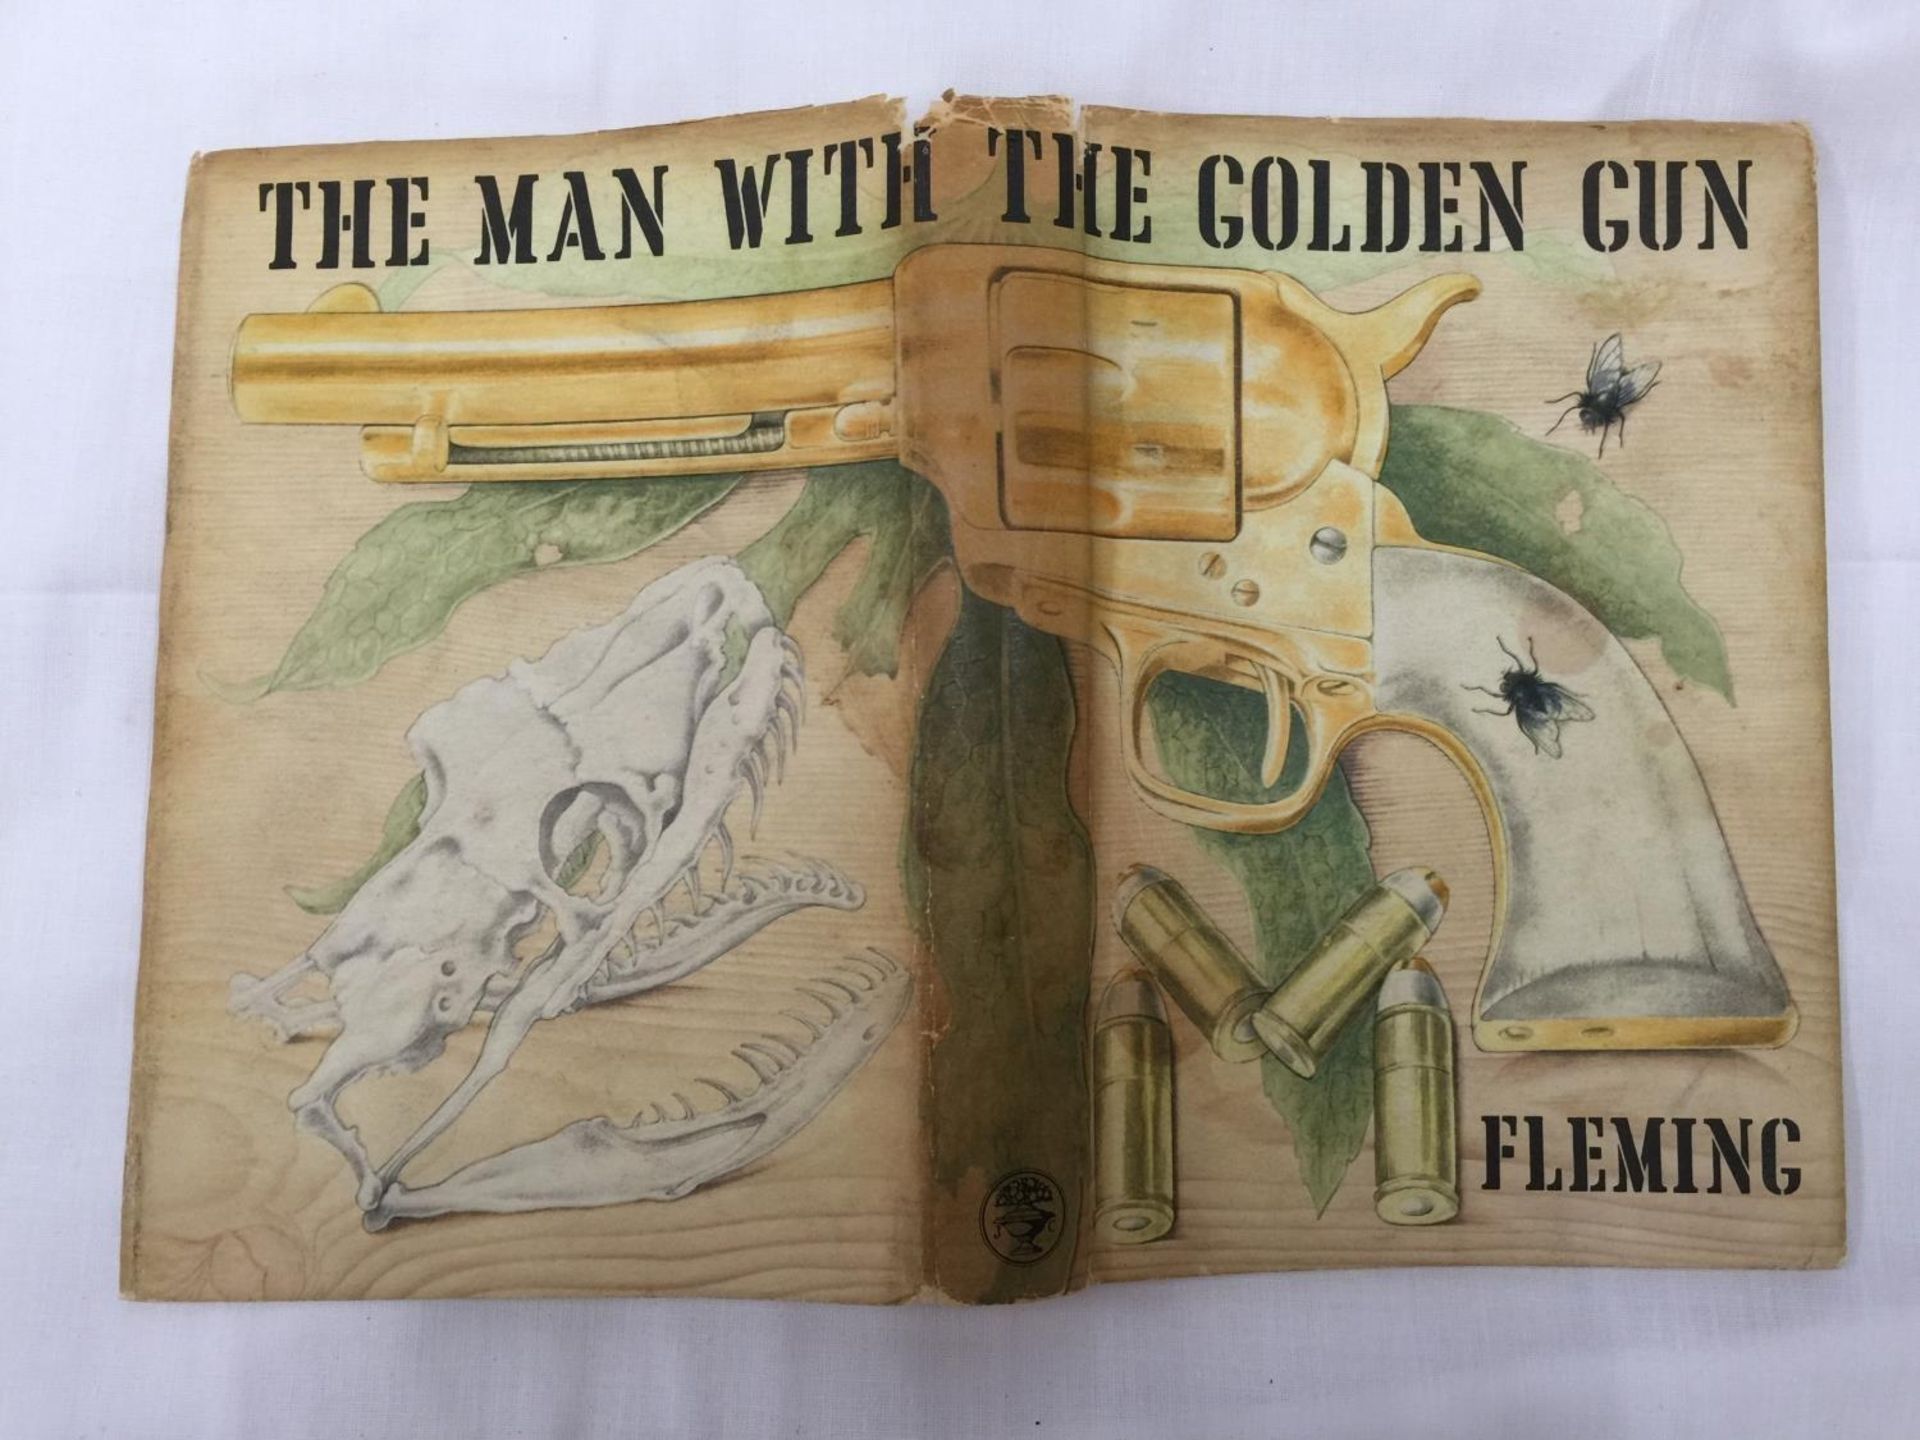 A FIRST EDITION JAMES BOND NOVEL - THE MAN WITH THE GOLDEN GUN BY IAN FLEMING, HARDBACK WITH DUST - Image 3 of 11